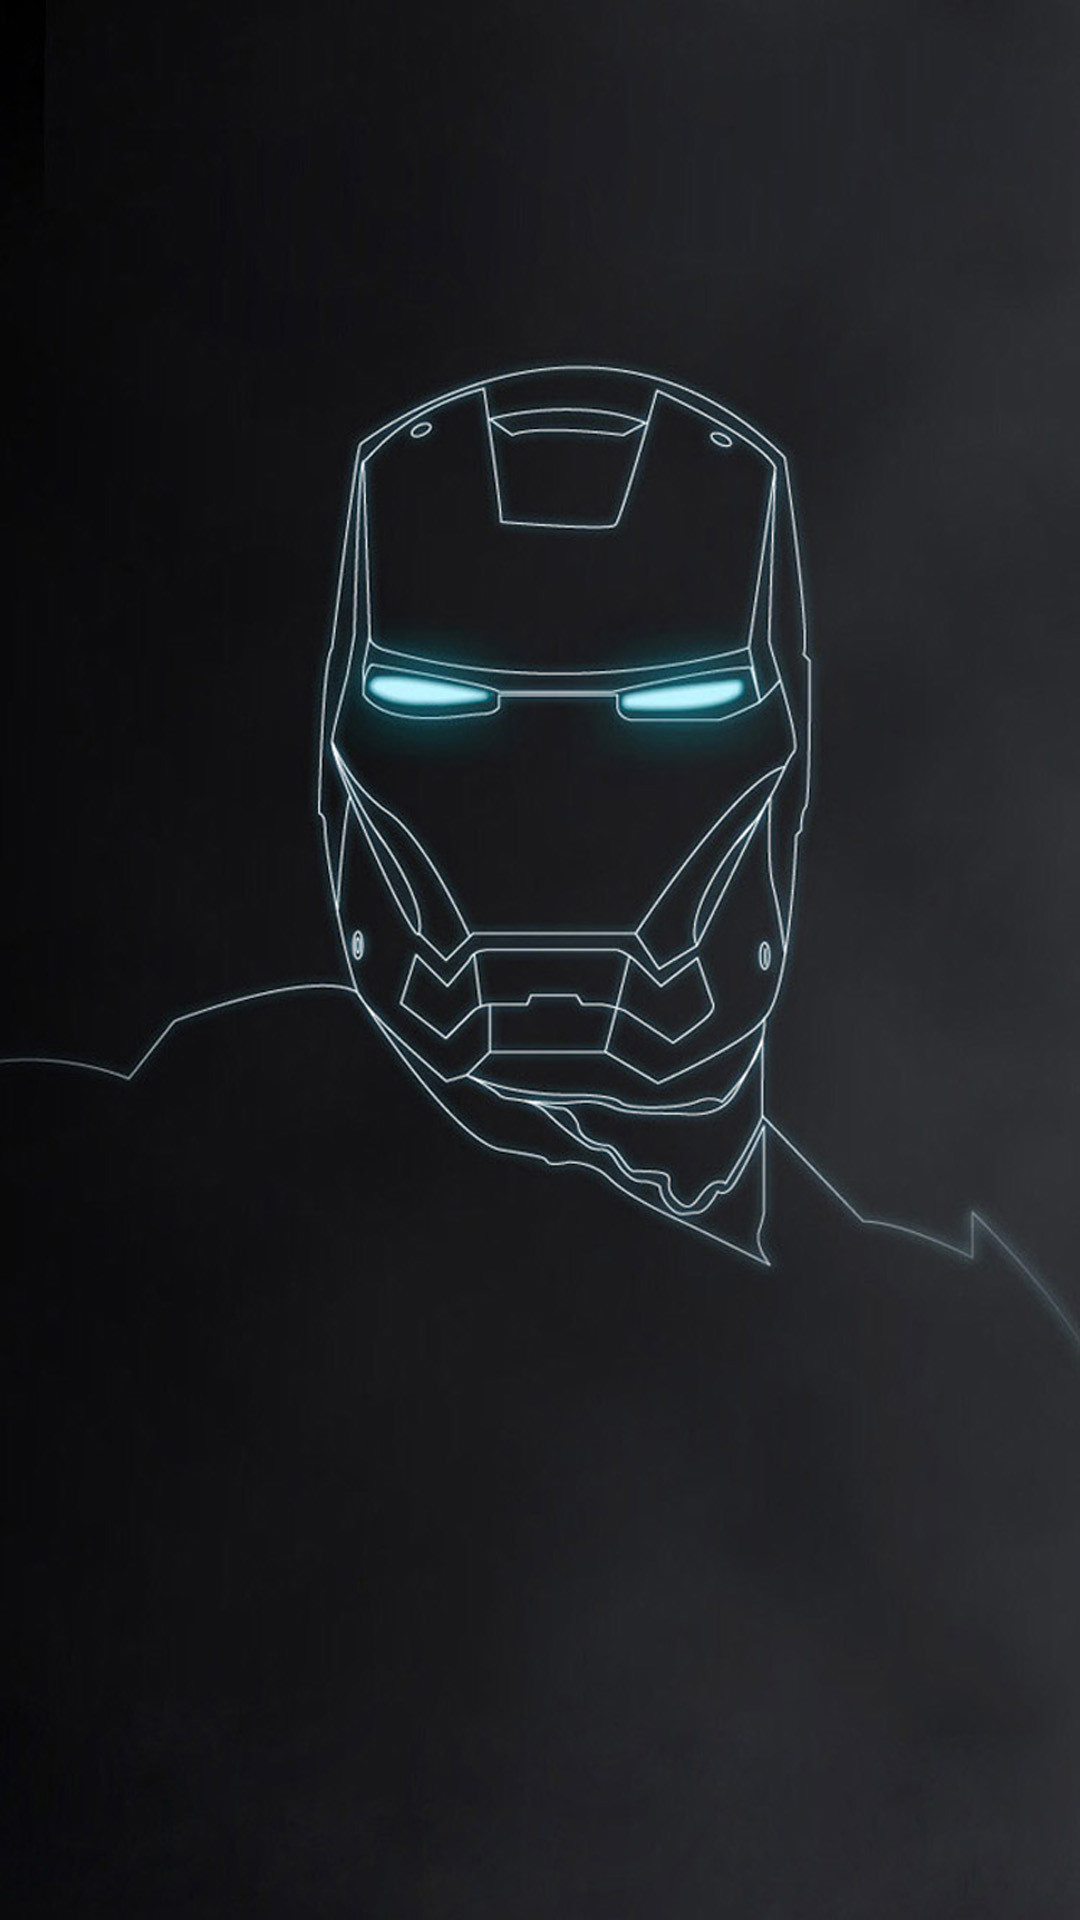 1080x1920 Iron Man 3 Movie iPhone 6 Wallpaper and iPhone 6 Plus Wallpapers